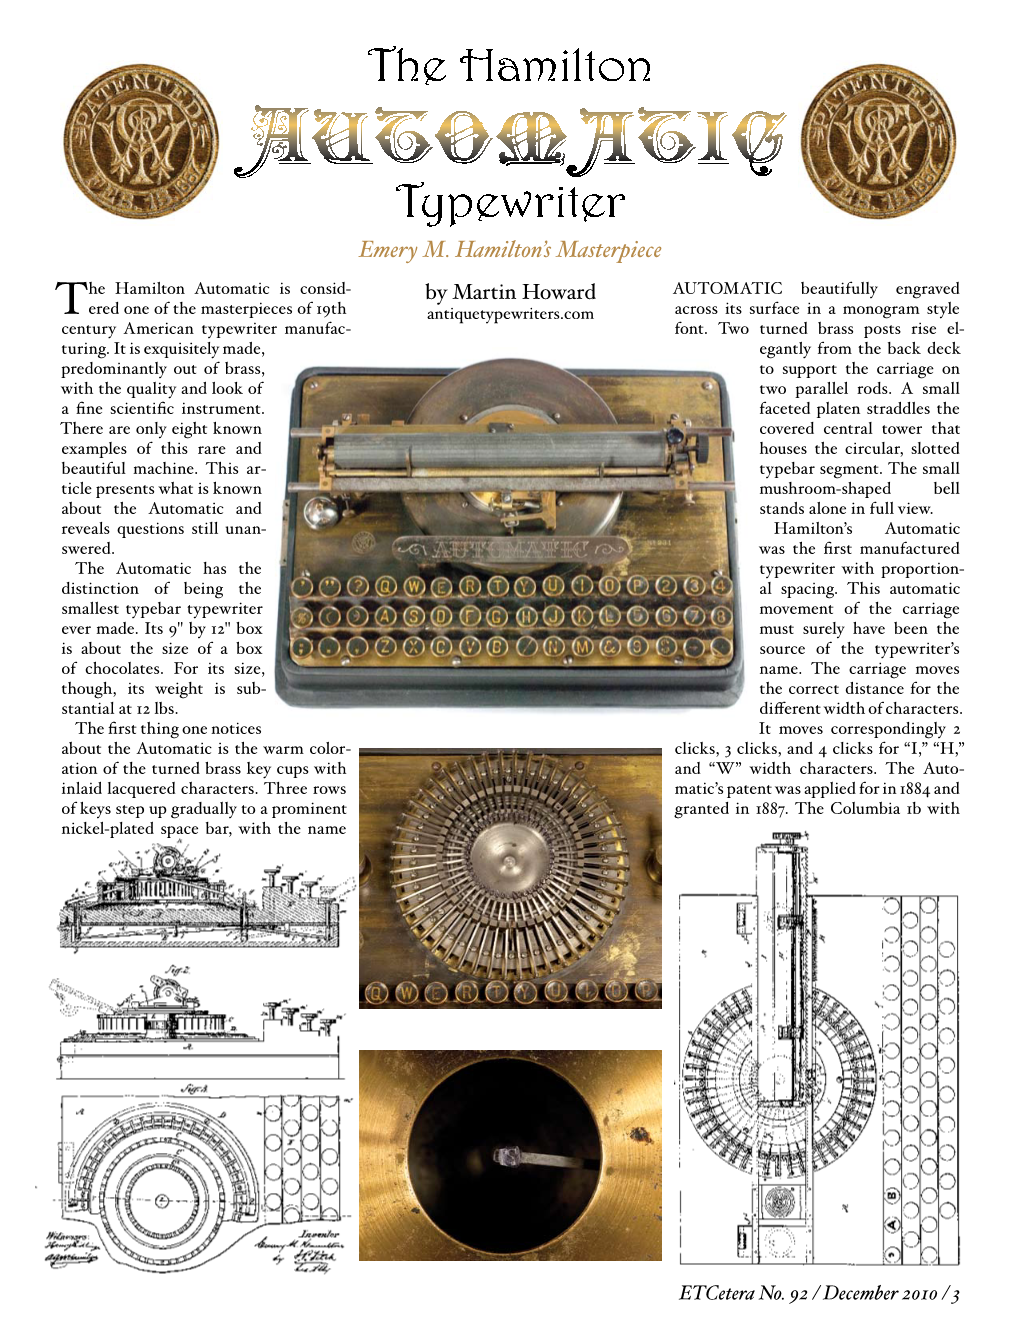 The Automatic Typewriter Company Was Word “Automatic” Repeated Three Times Patent No